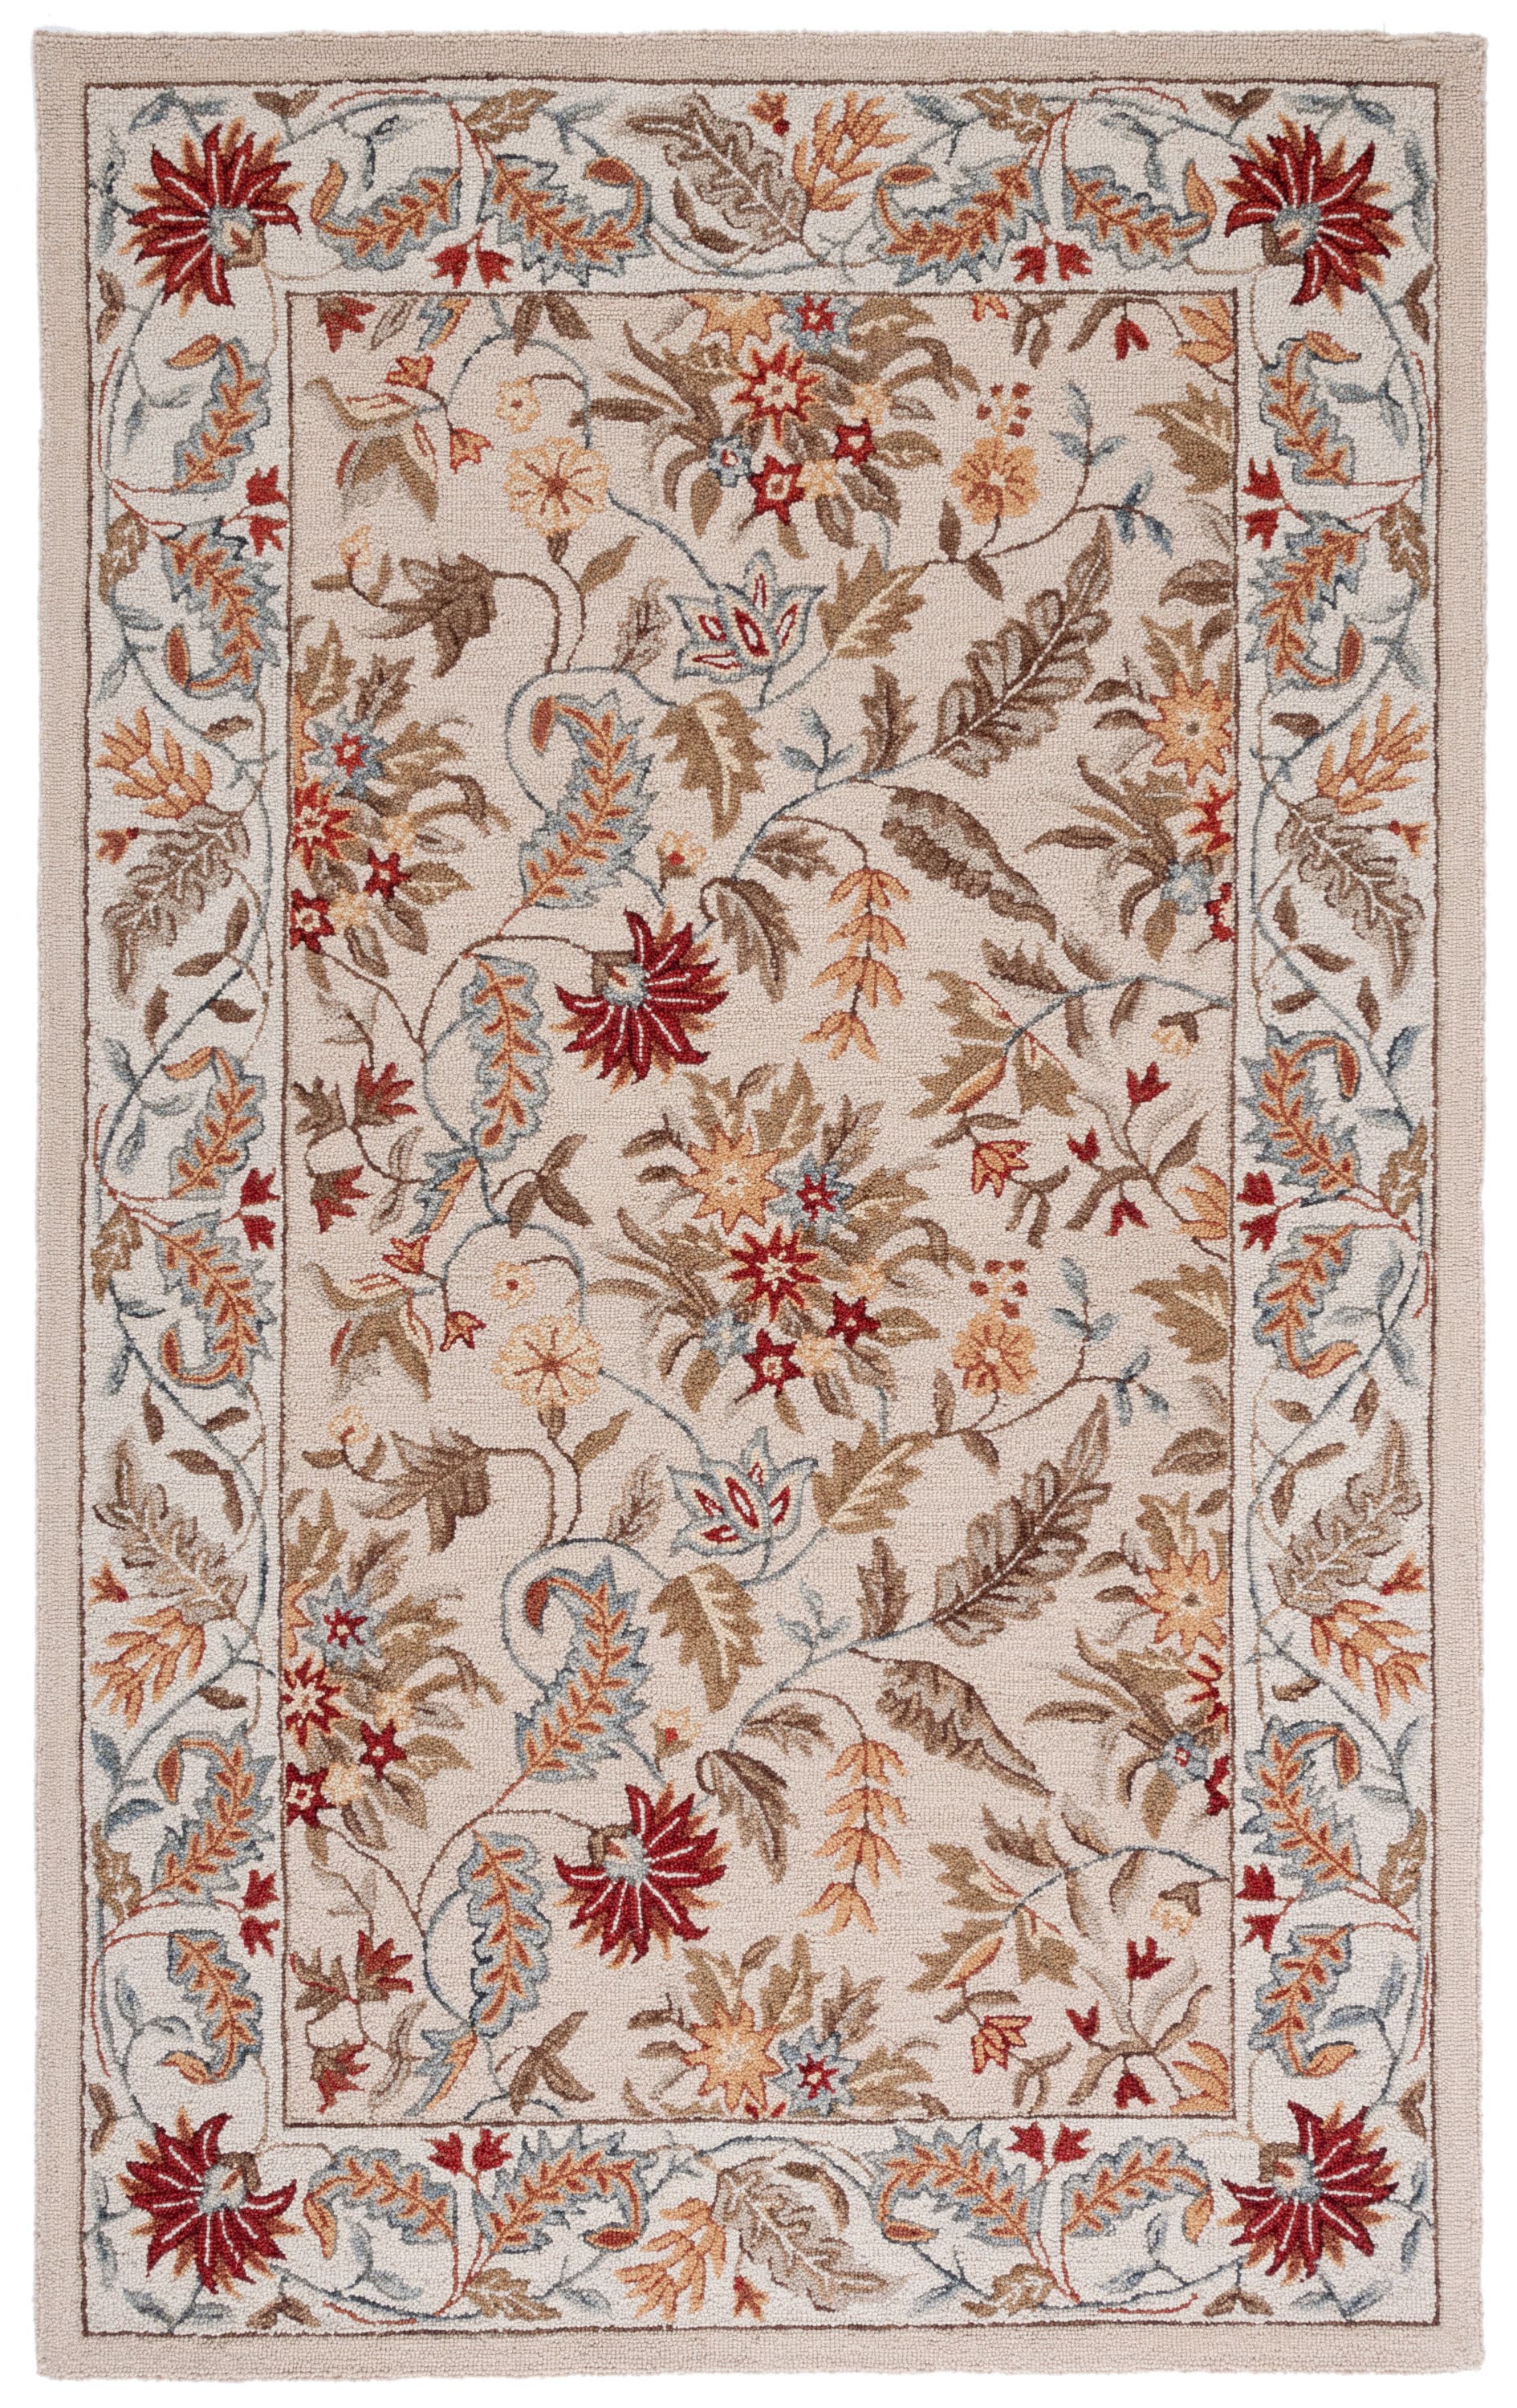 SAFAVIEH Chelsea Ivory 8 ft. x 10 ft. Oval Floral Border Solid Area Rug  HK248A-8OV - The Home Depot